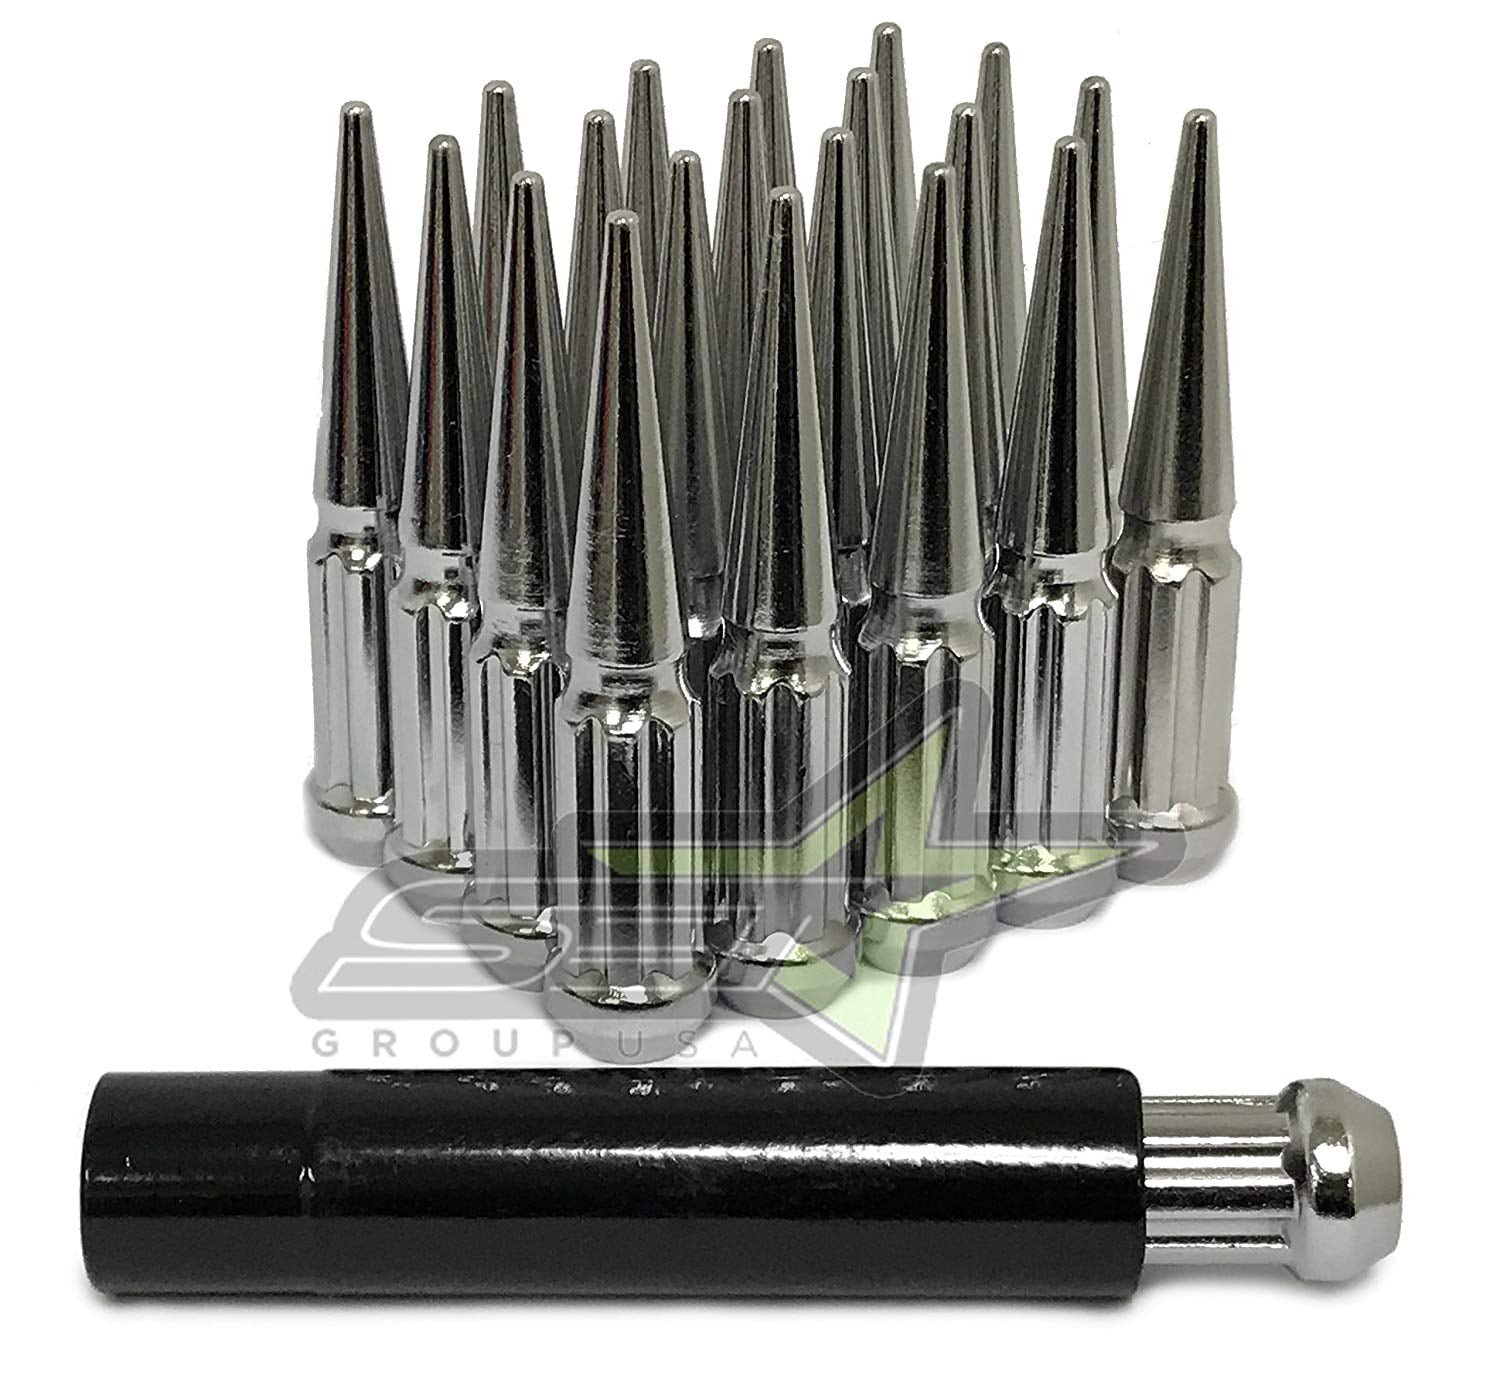 Details about  / 20PC ACURA 4.5/'/' TALL CHROME 14X1.5 SPLINE SPIKE LUG NUTS KEY FOR ACURA MODELS